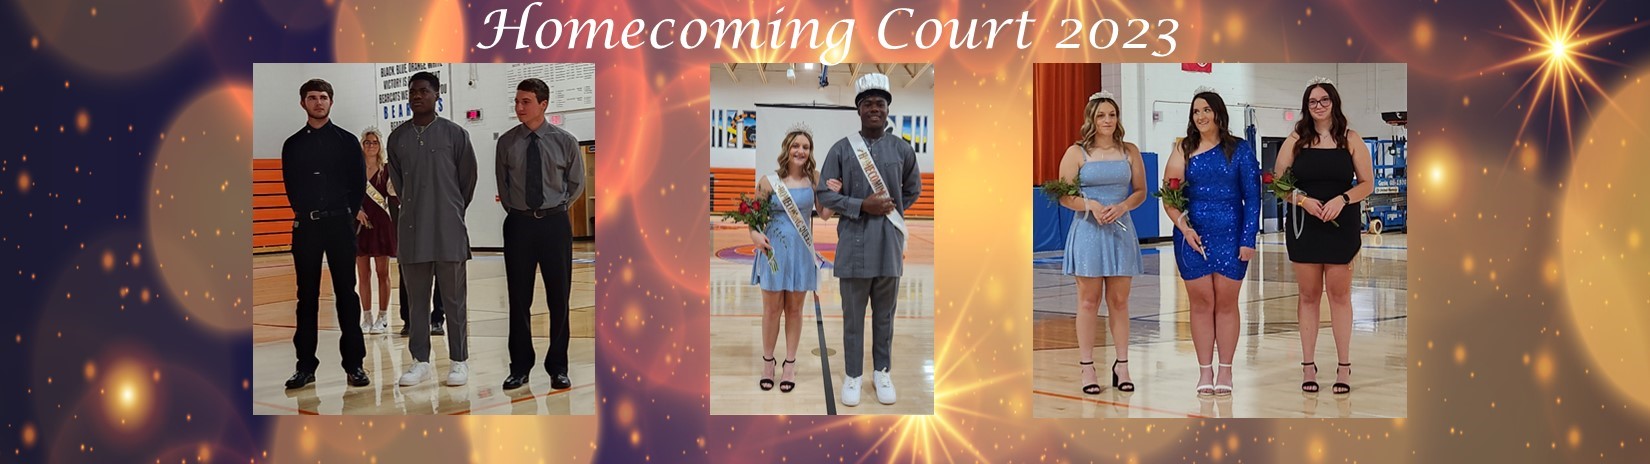 Images of homecoming court and homecoming king and queen